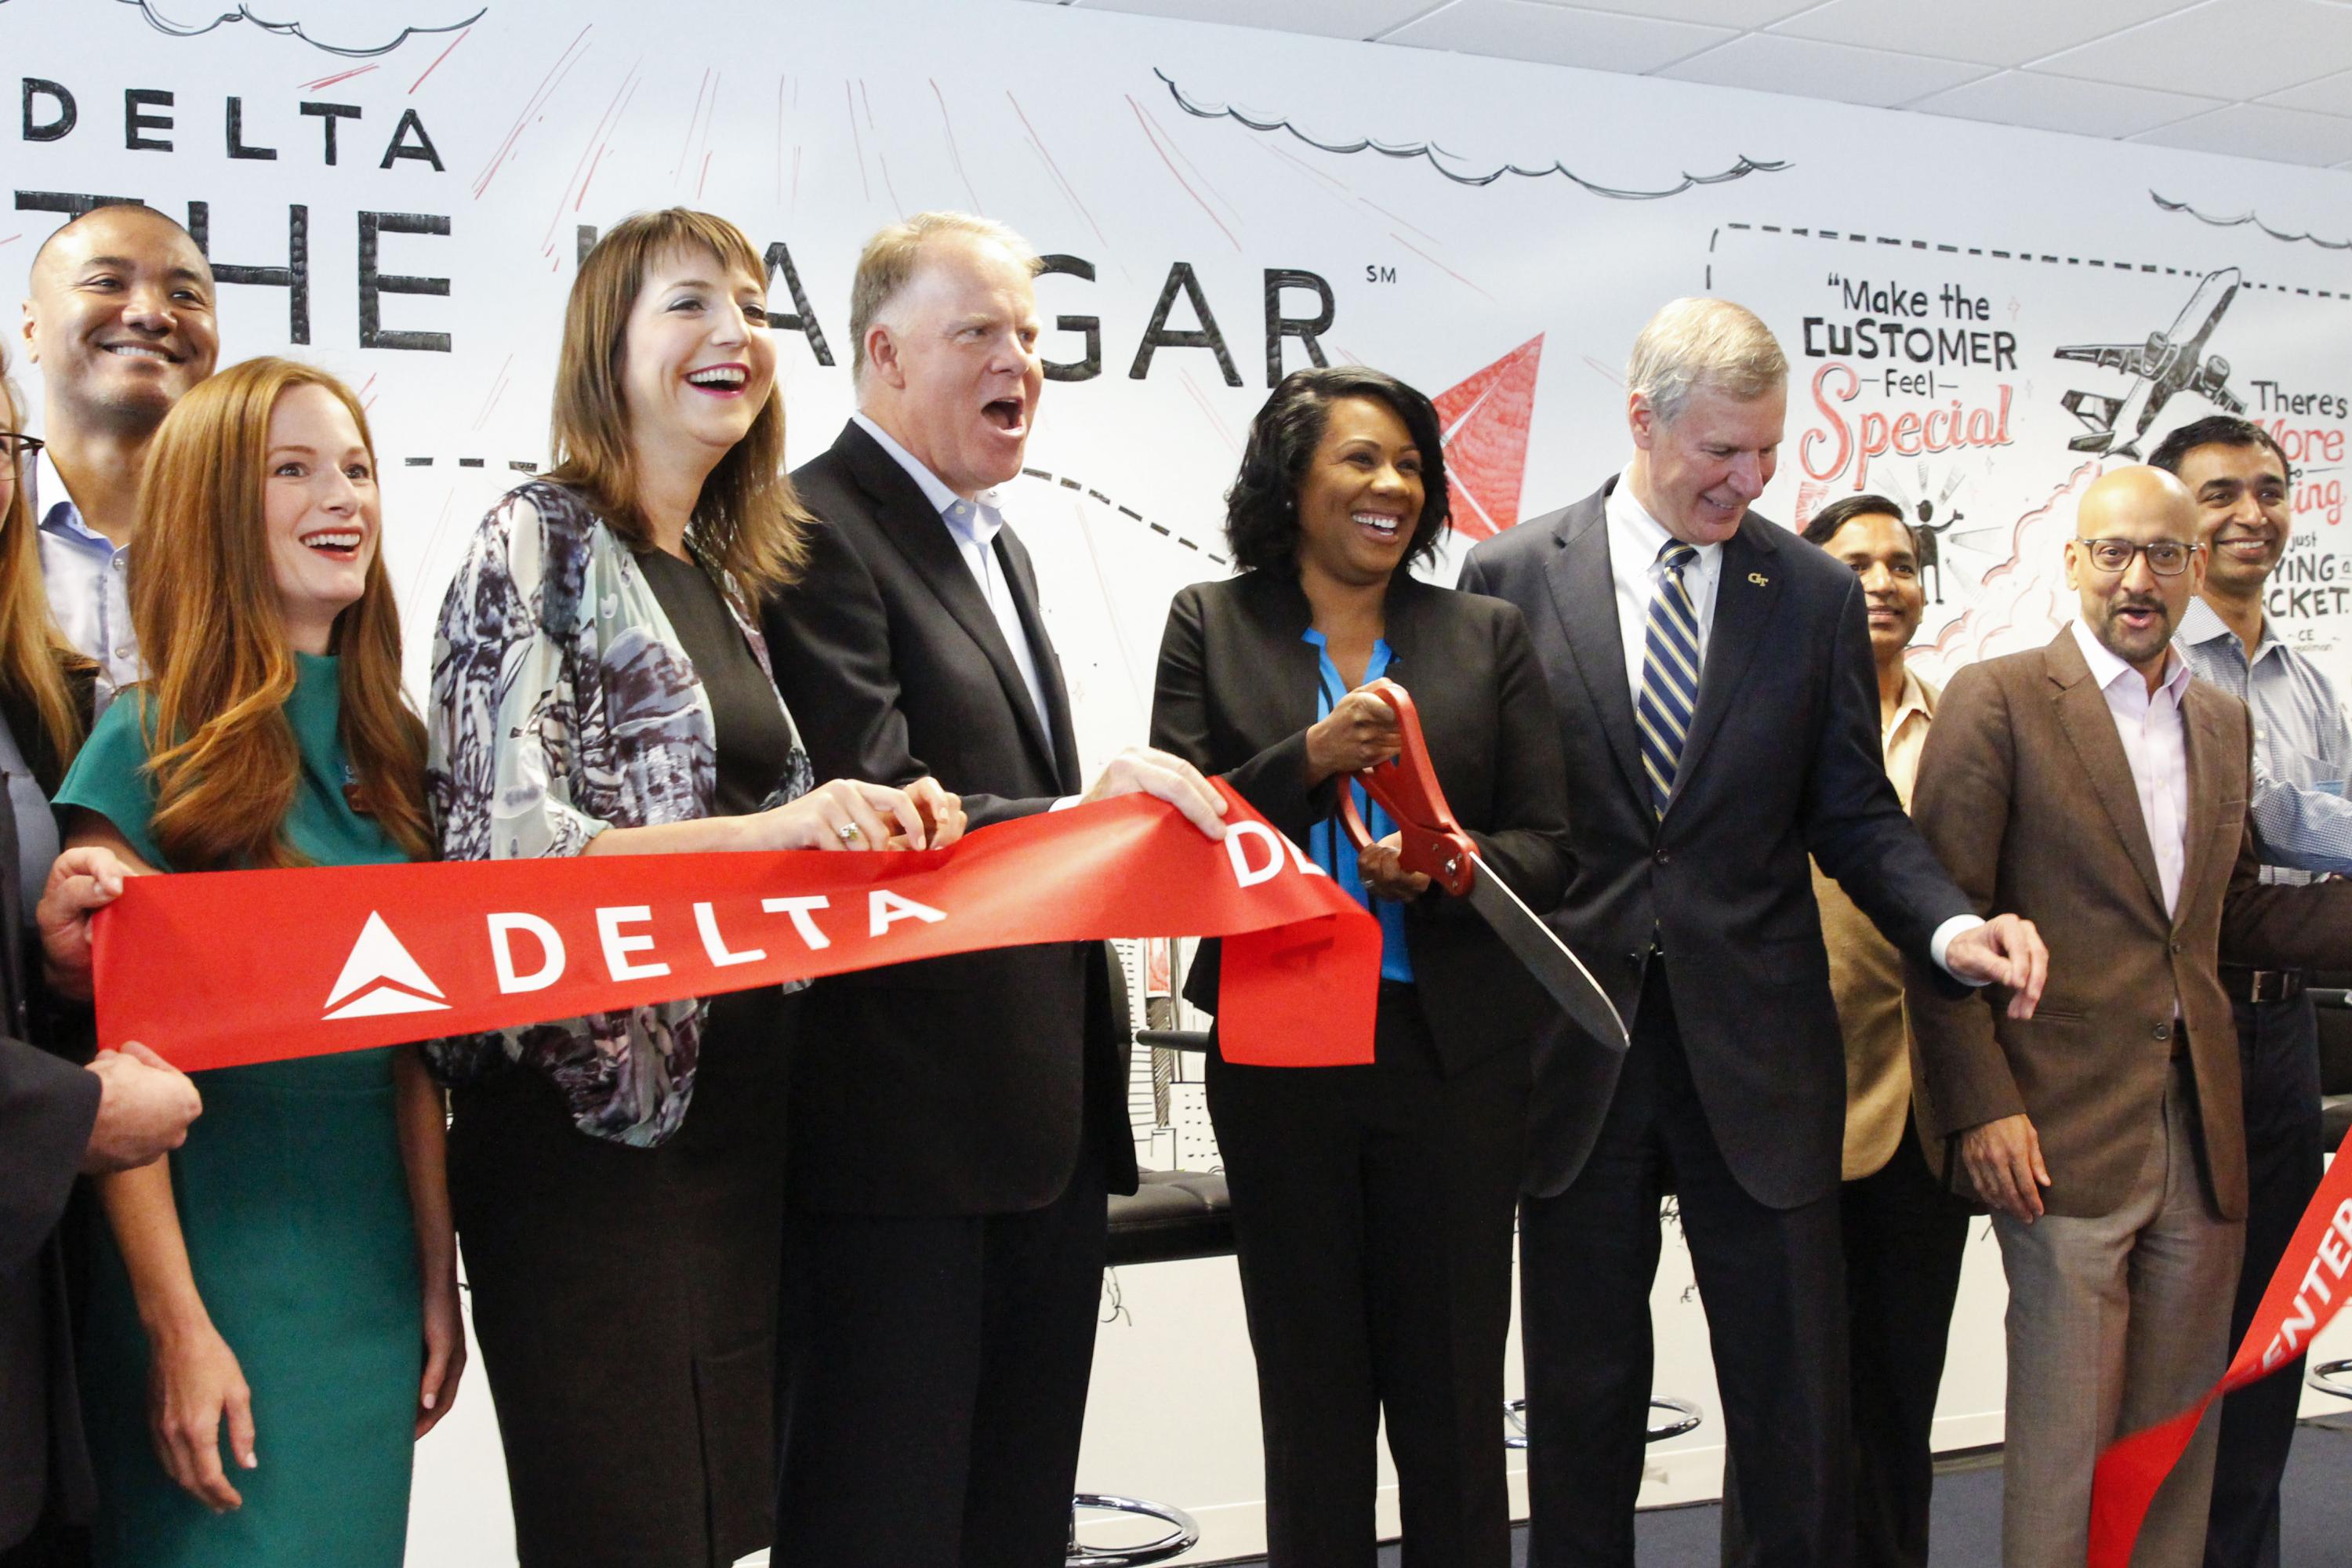 The Hangar, Delta's global innovation center at Georgia Tech, re-opened on May 2.